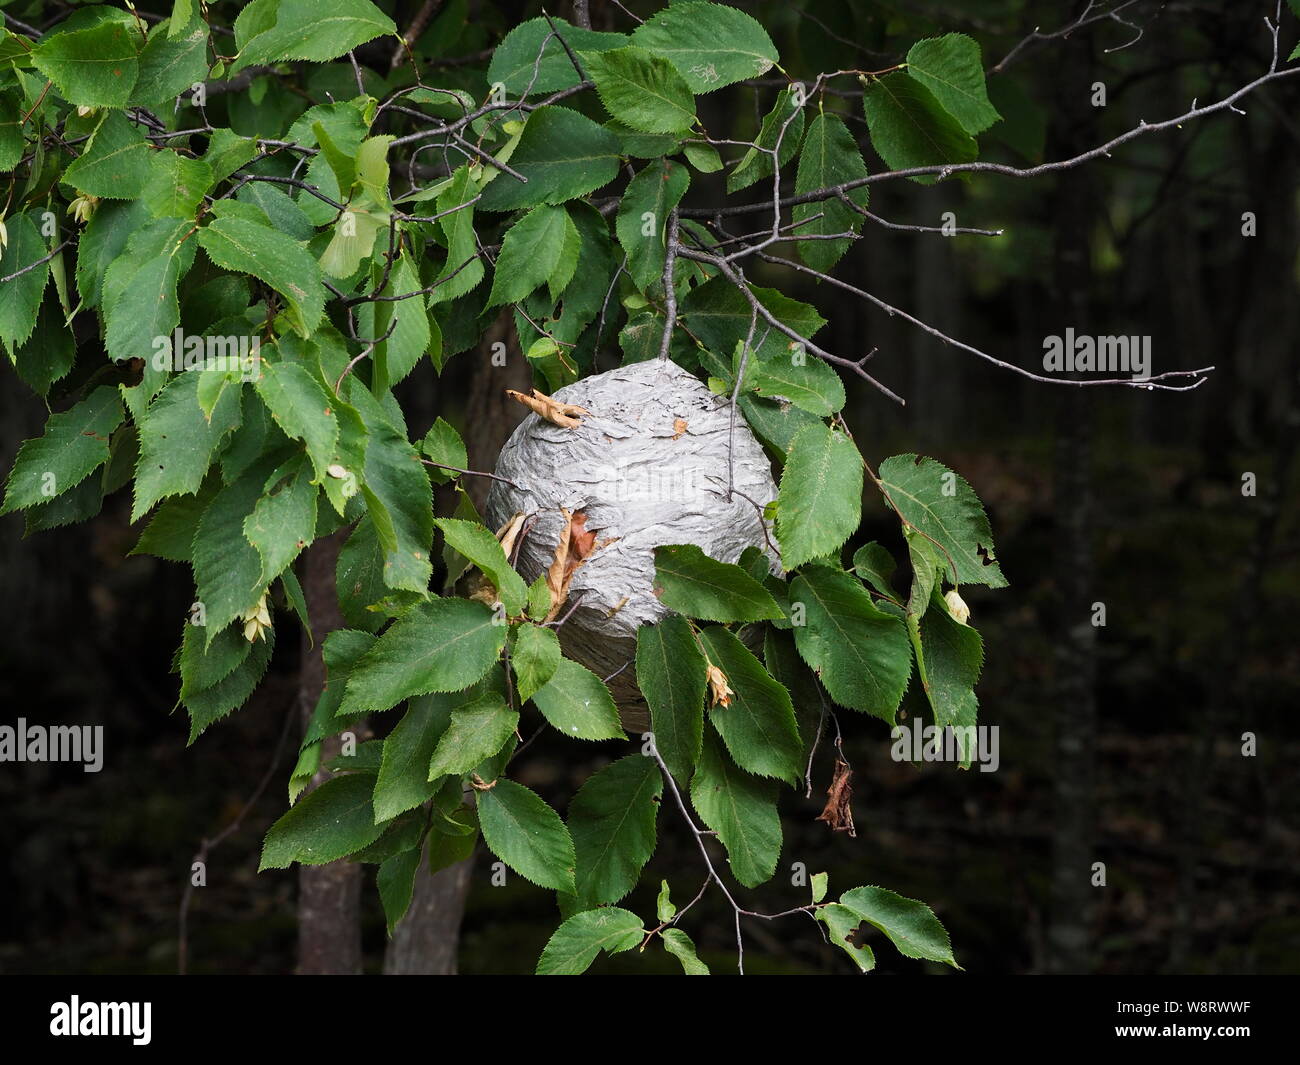 Large nest of wasps hanging from a tree branch Stock Photo